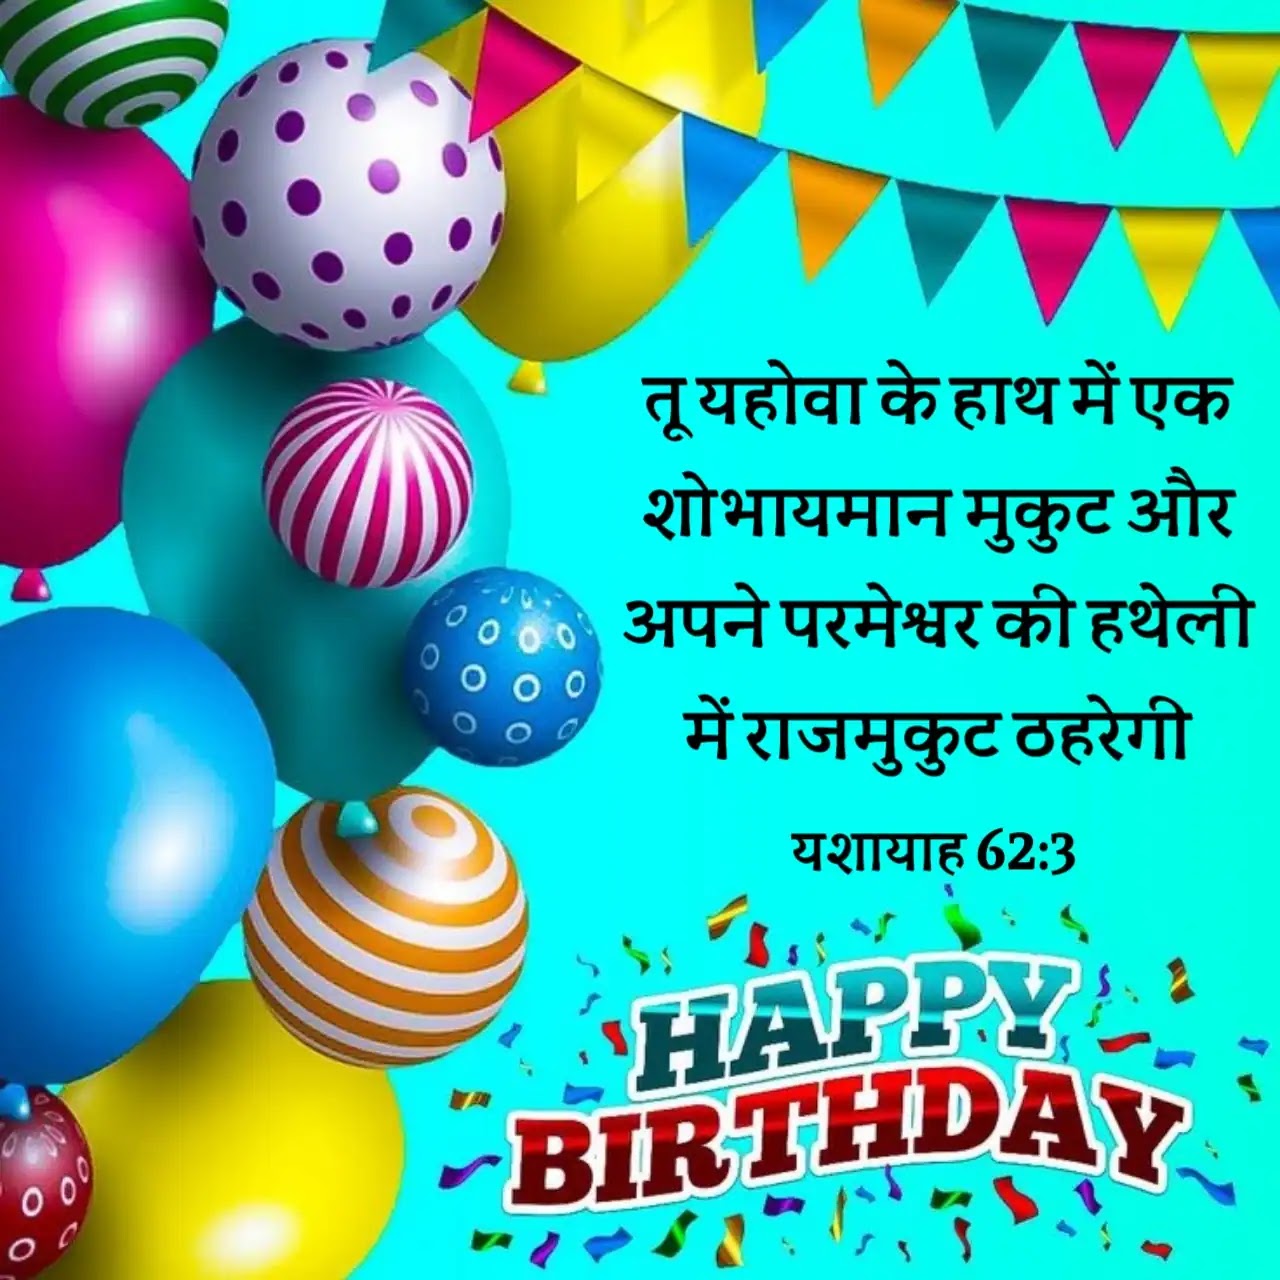 Happy Birthday Wishes Images With Bible Verses In Hindi - Click Bibles